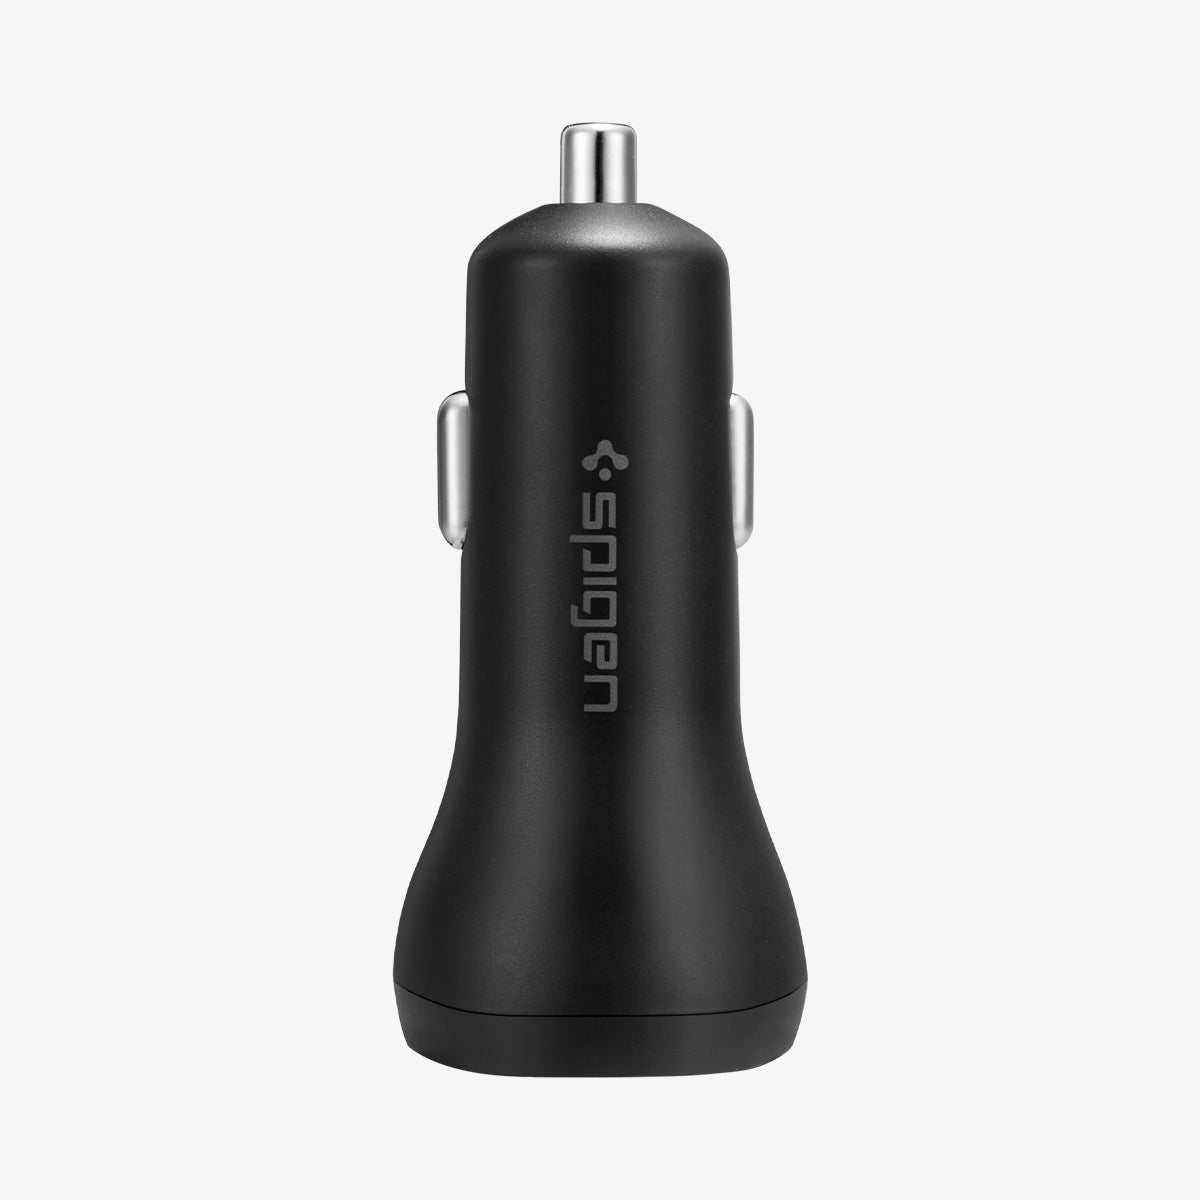 000CP25597 - SteadiBoost™ USB-C PD3.0 Car Charger showing the front